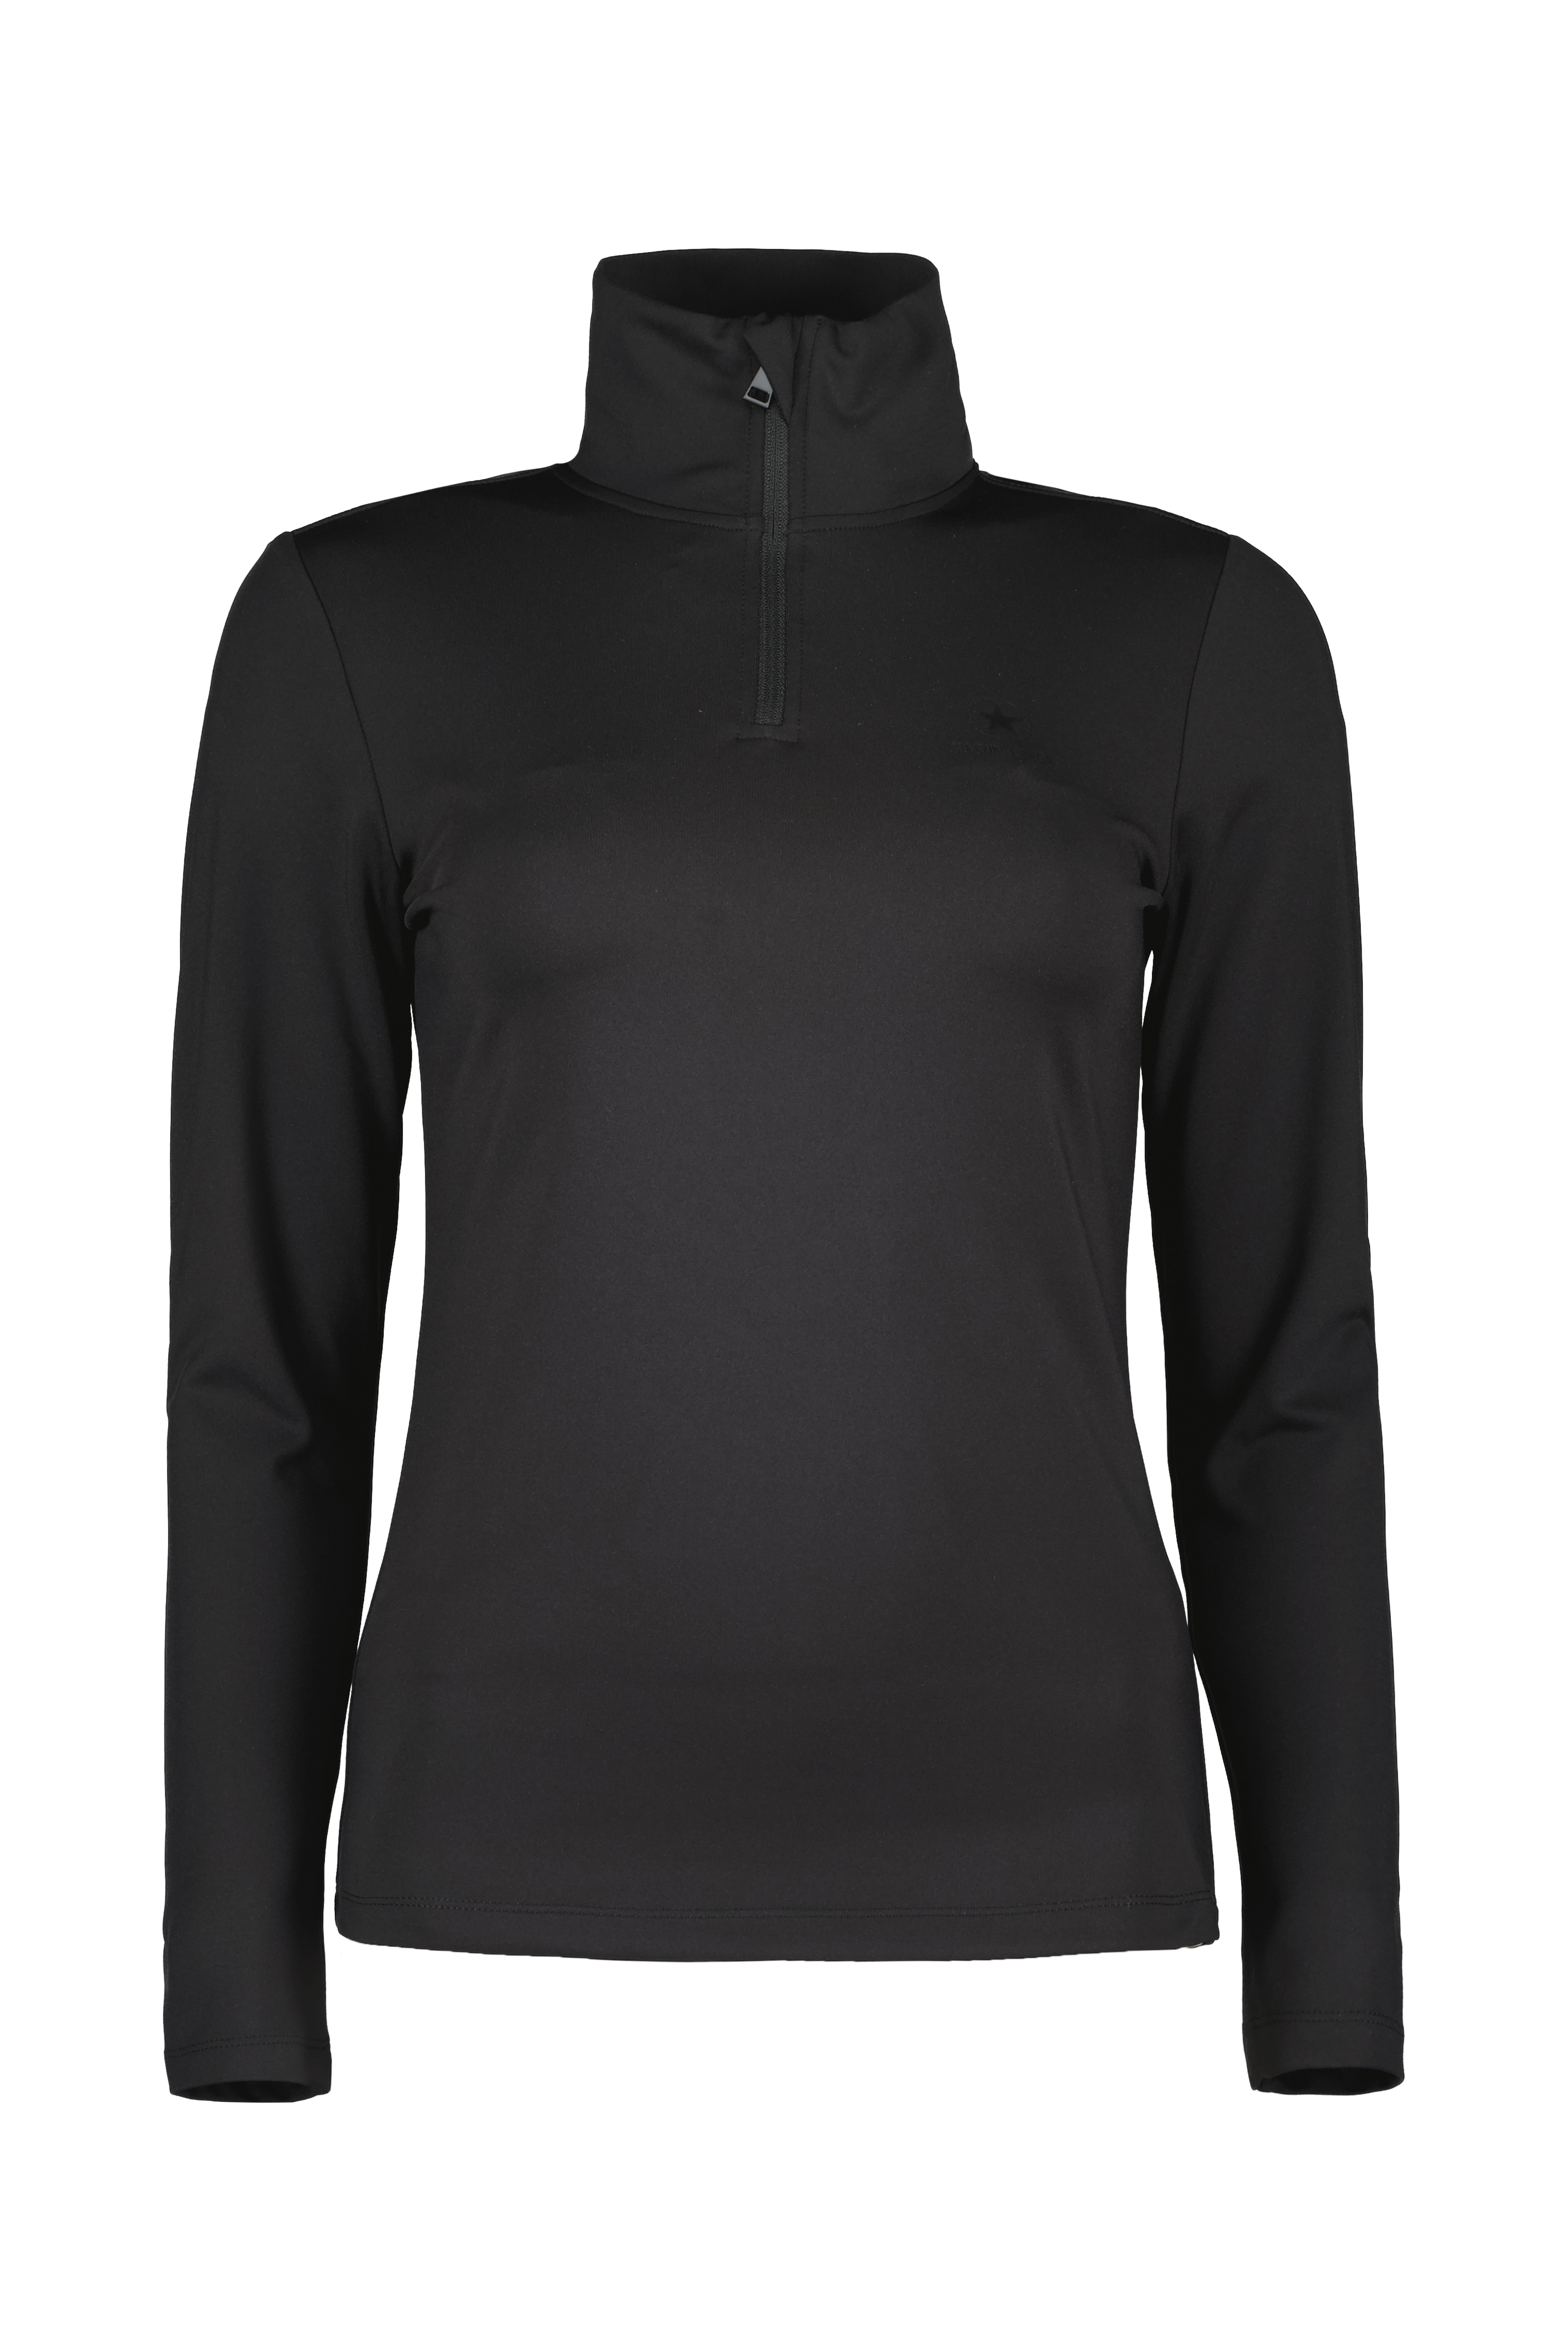 Airforce Womens Basic Zip Pully